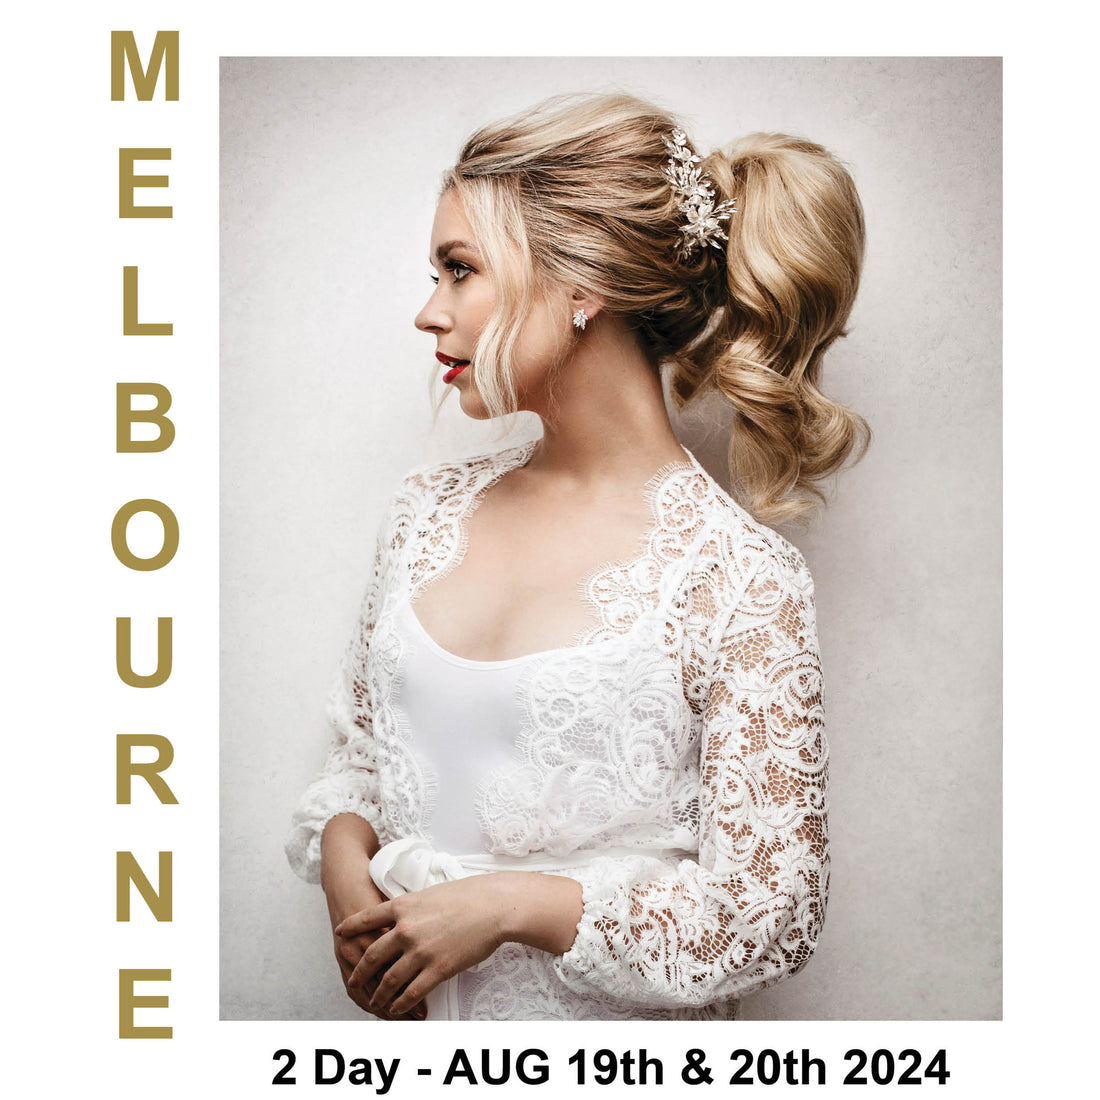 Melbourne - 2 Day Long Hair &amp; Bridal Workshop August 19th - 20th 2024